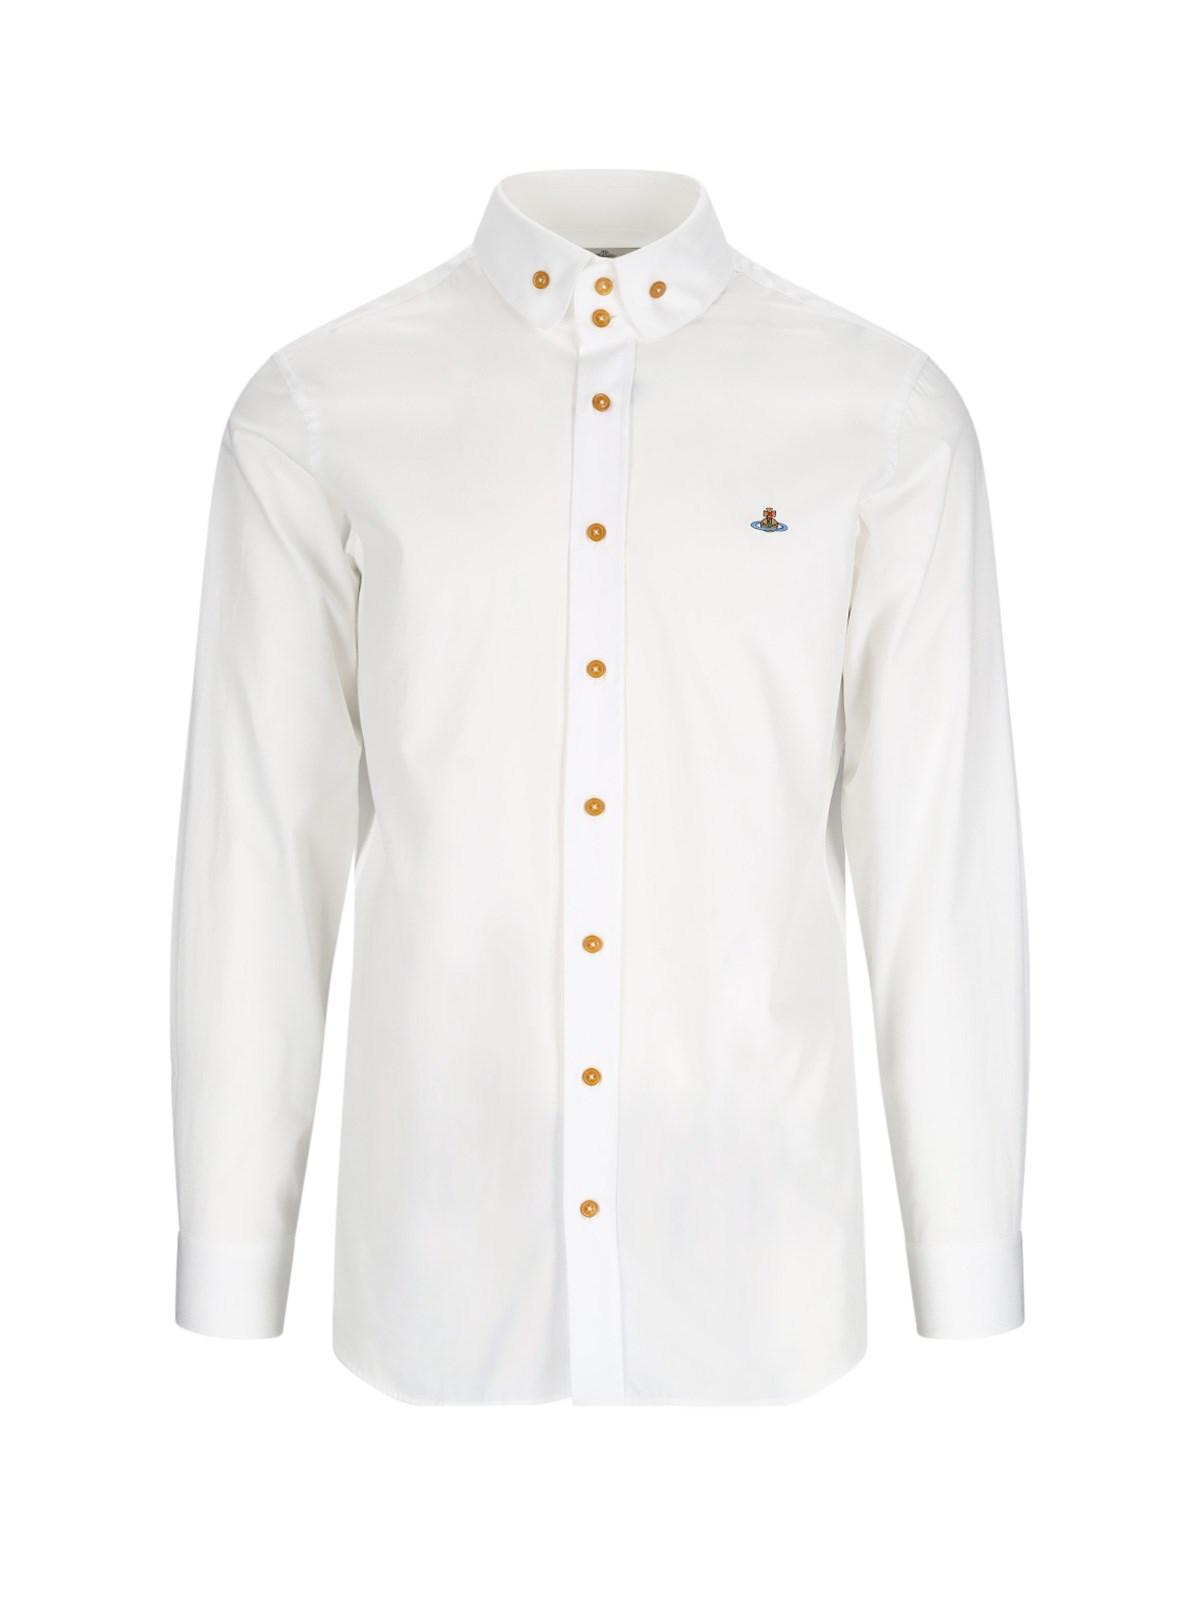 Vivienne Westwood 'two Button Krall' Shirt in White for Men | Lyst